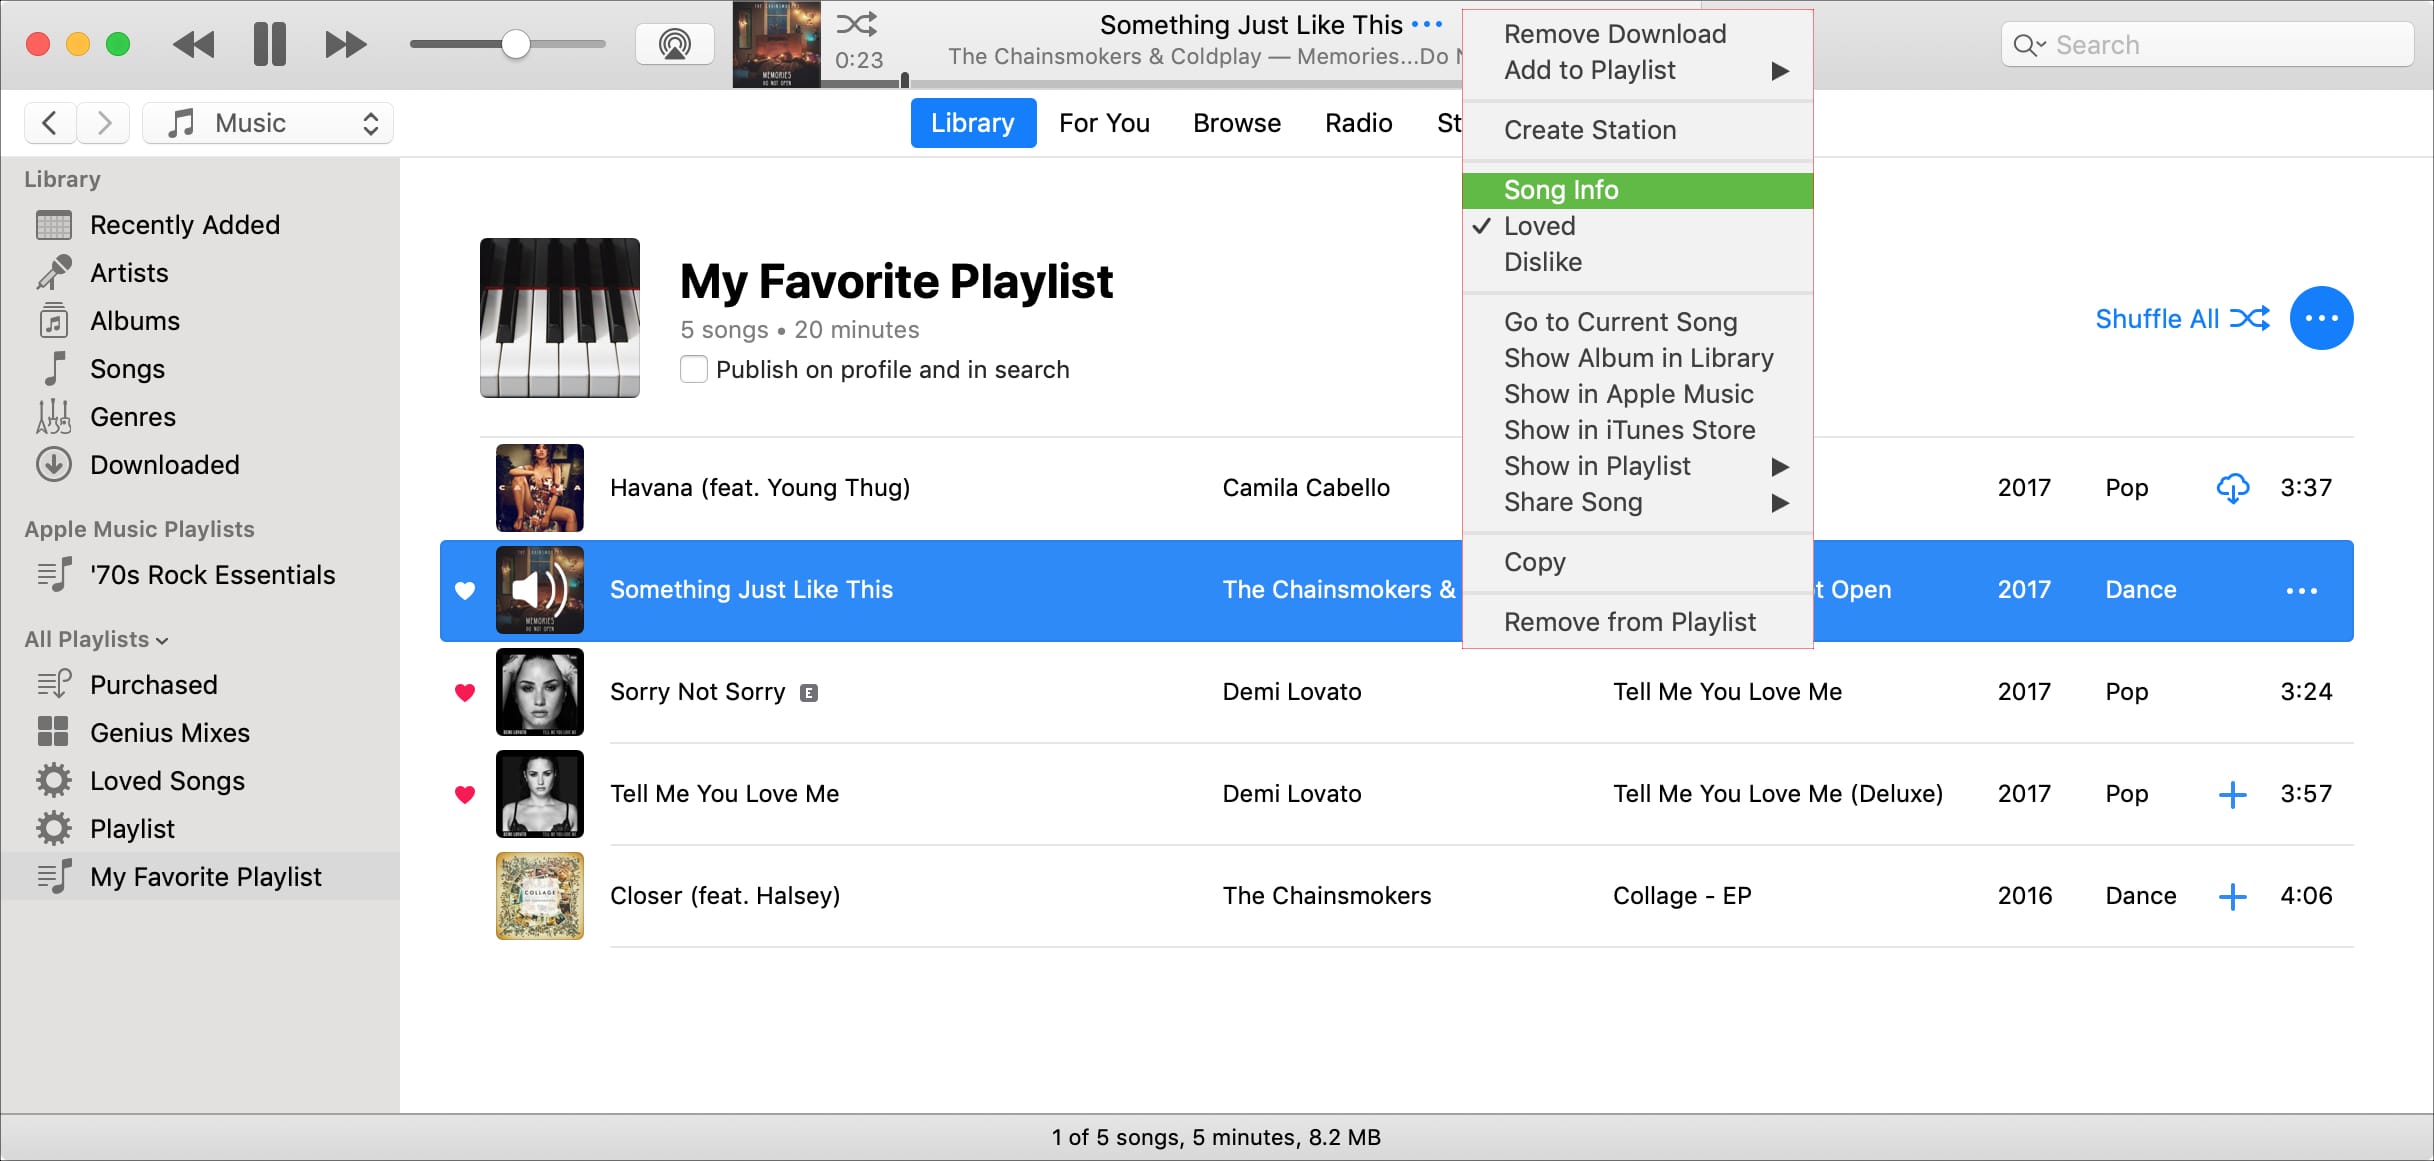 Add The MP3 Audiobooks Under iTunes “Audiobook Library” Section